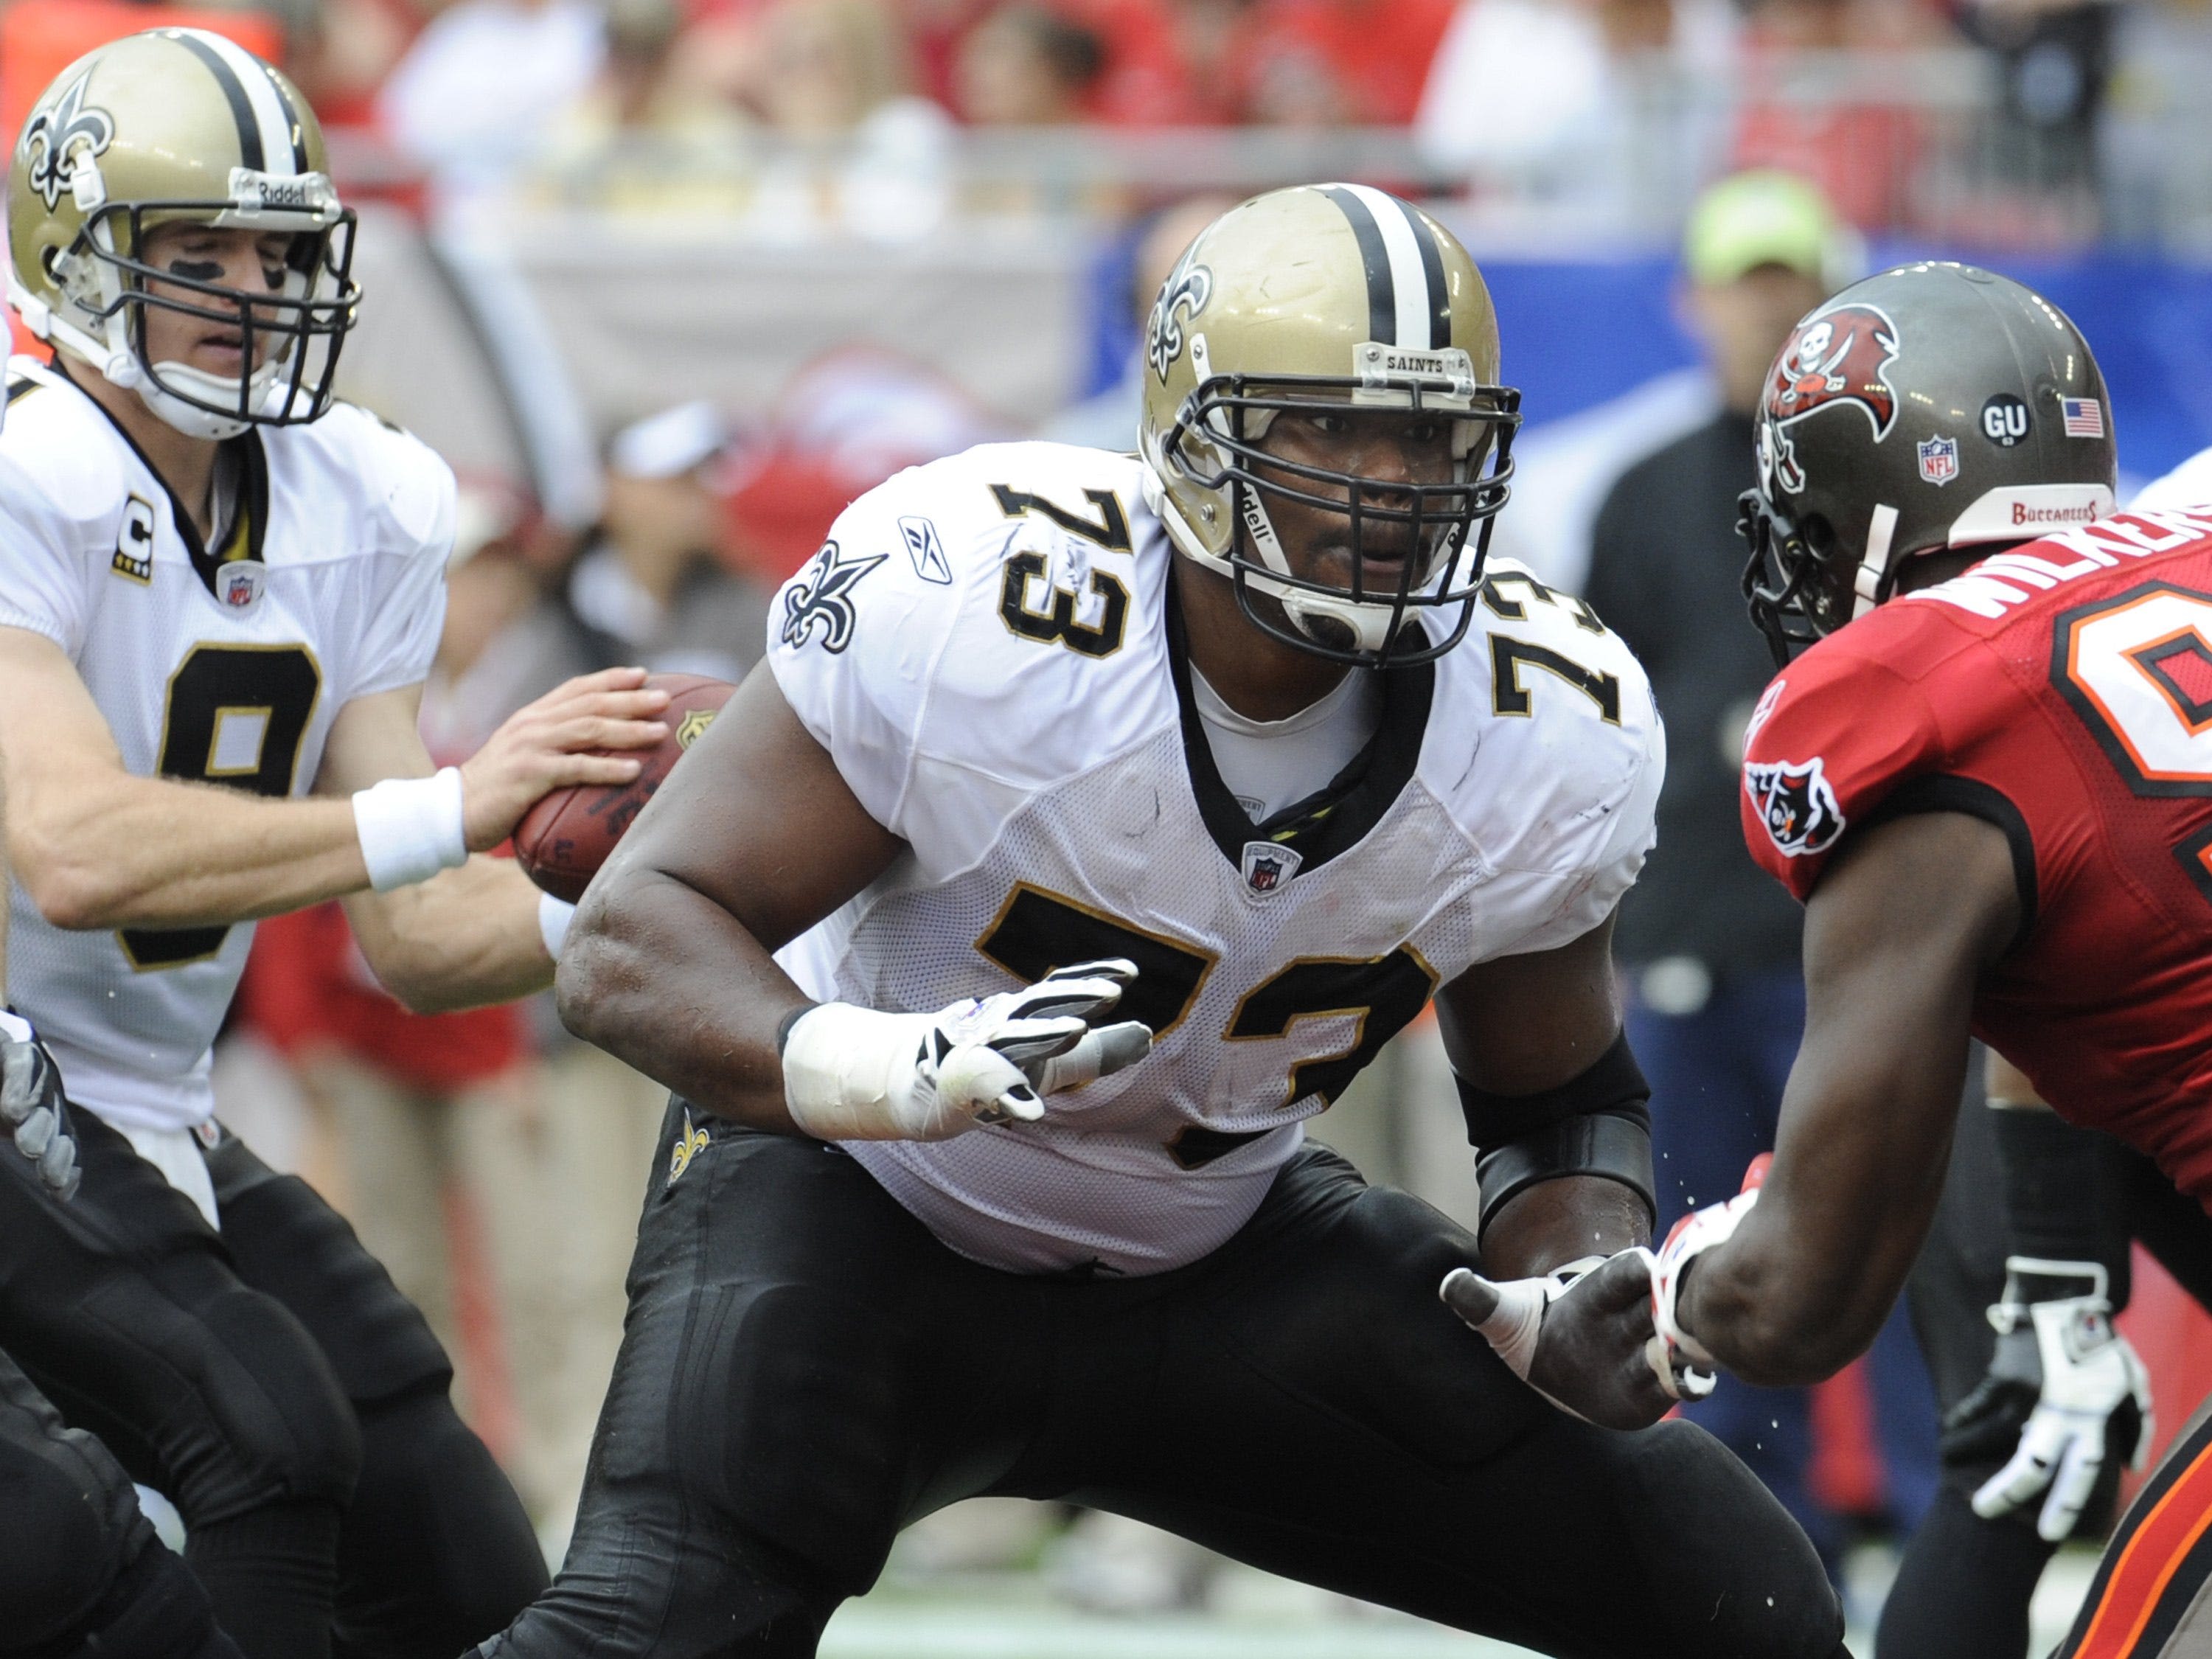 Saints legend Jahri Evans set to be added to team's Ring of Honor